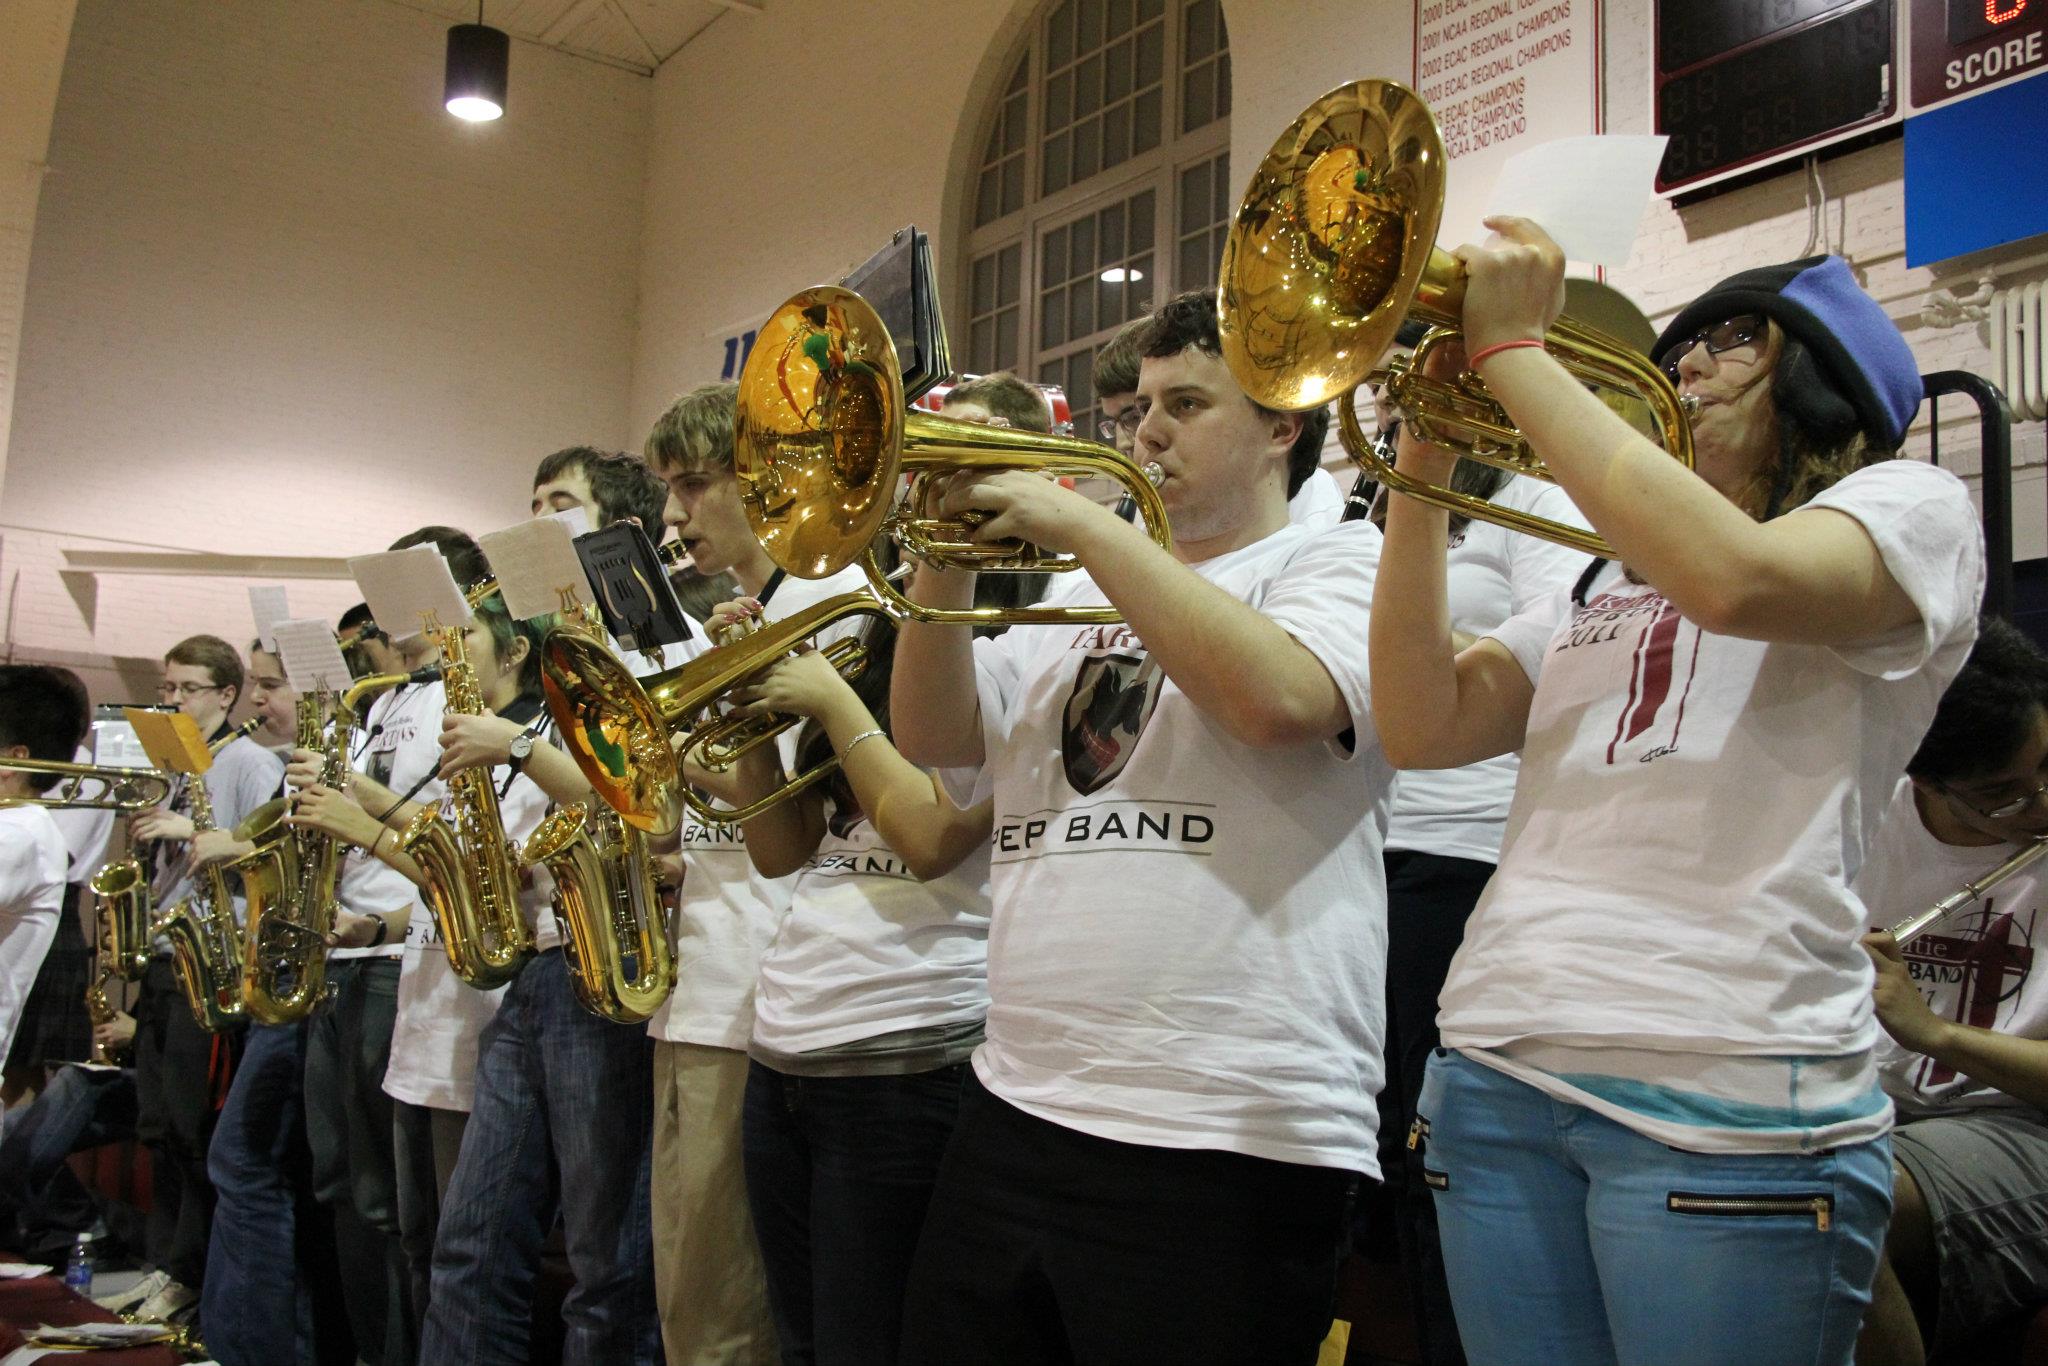 A mighty horn line, if I do say so myself.